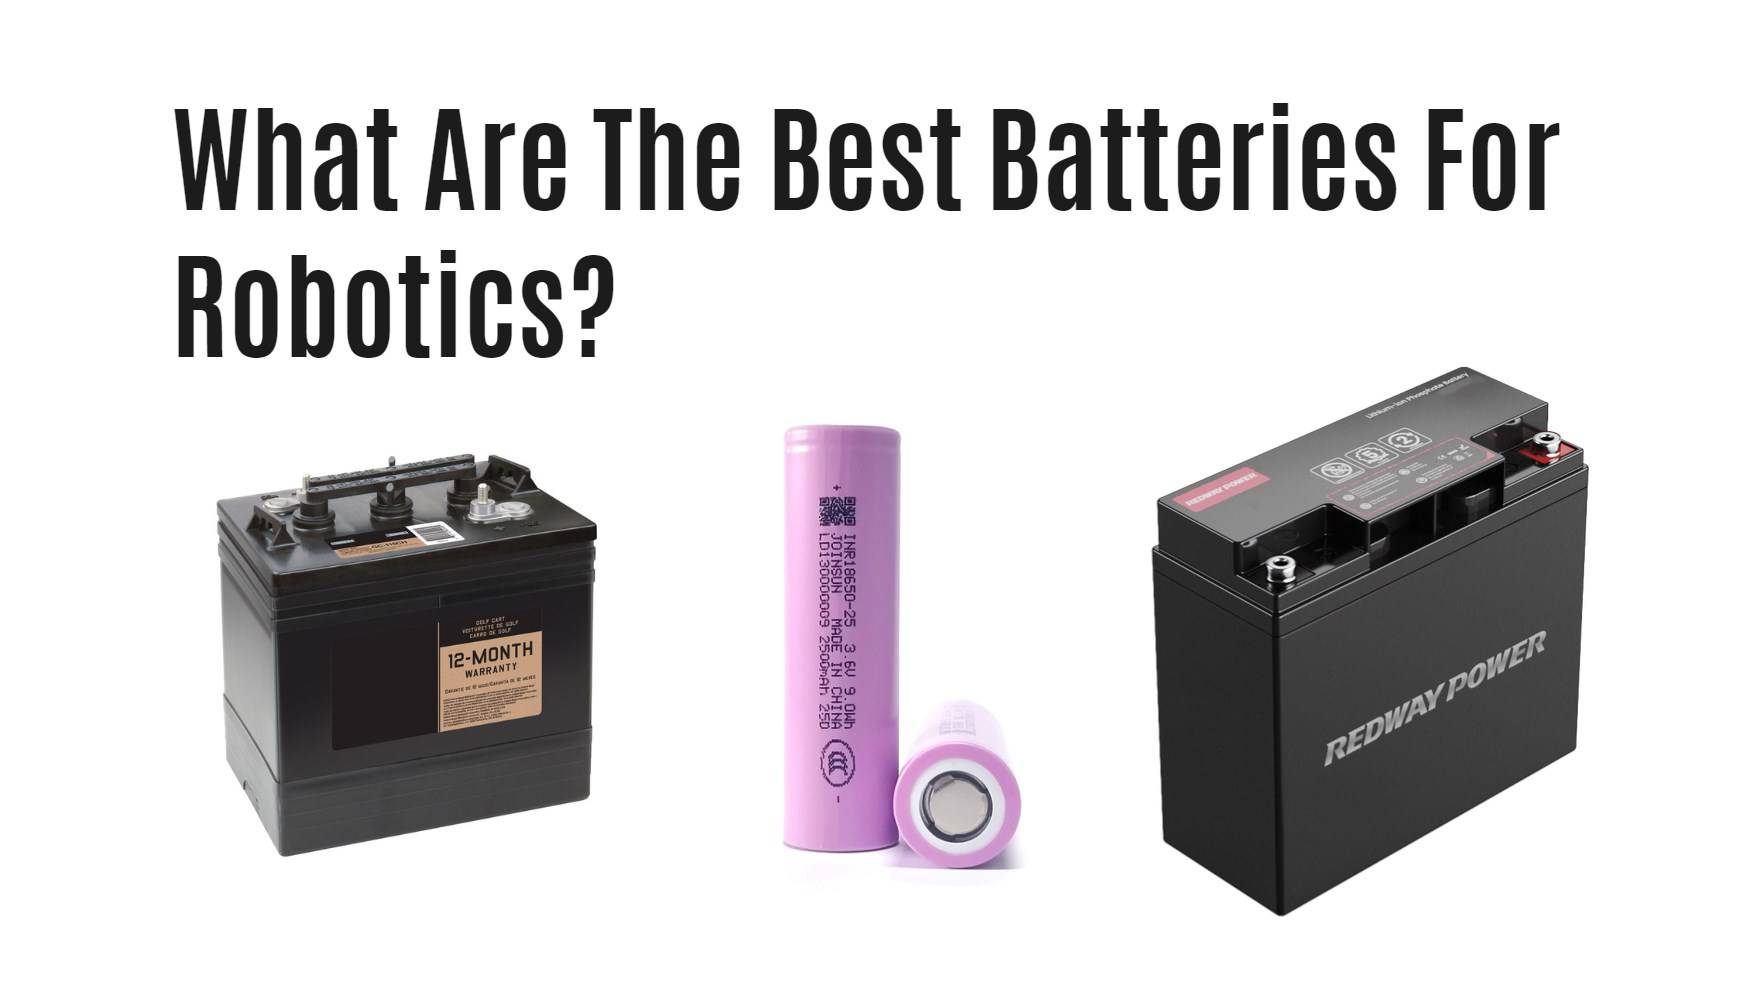 What Are The Best Batteries For Robotics? 12v 20ah lifepo4 battery . joinsun 21700 li-ion cell factory